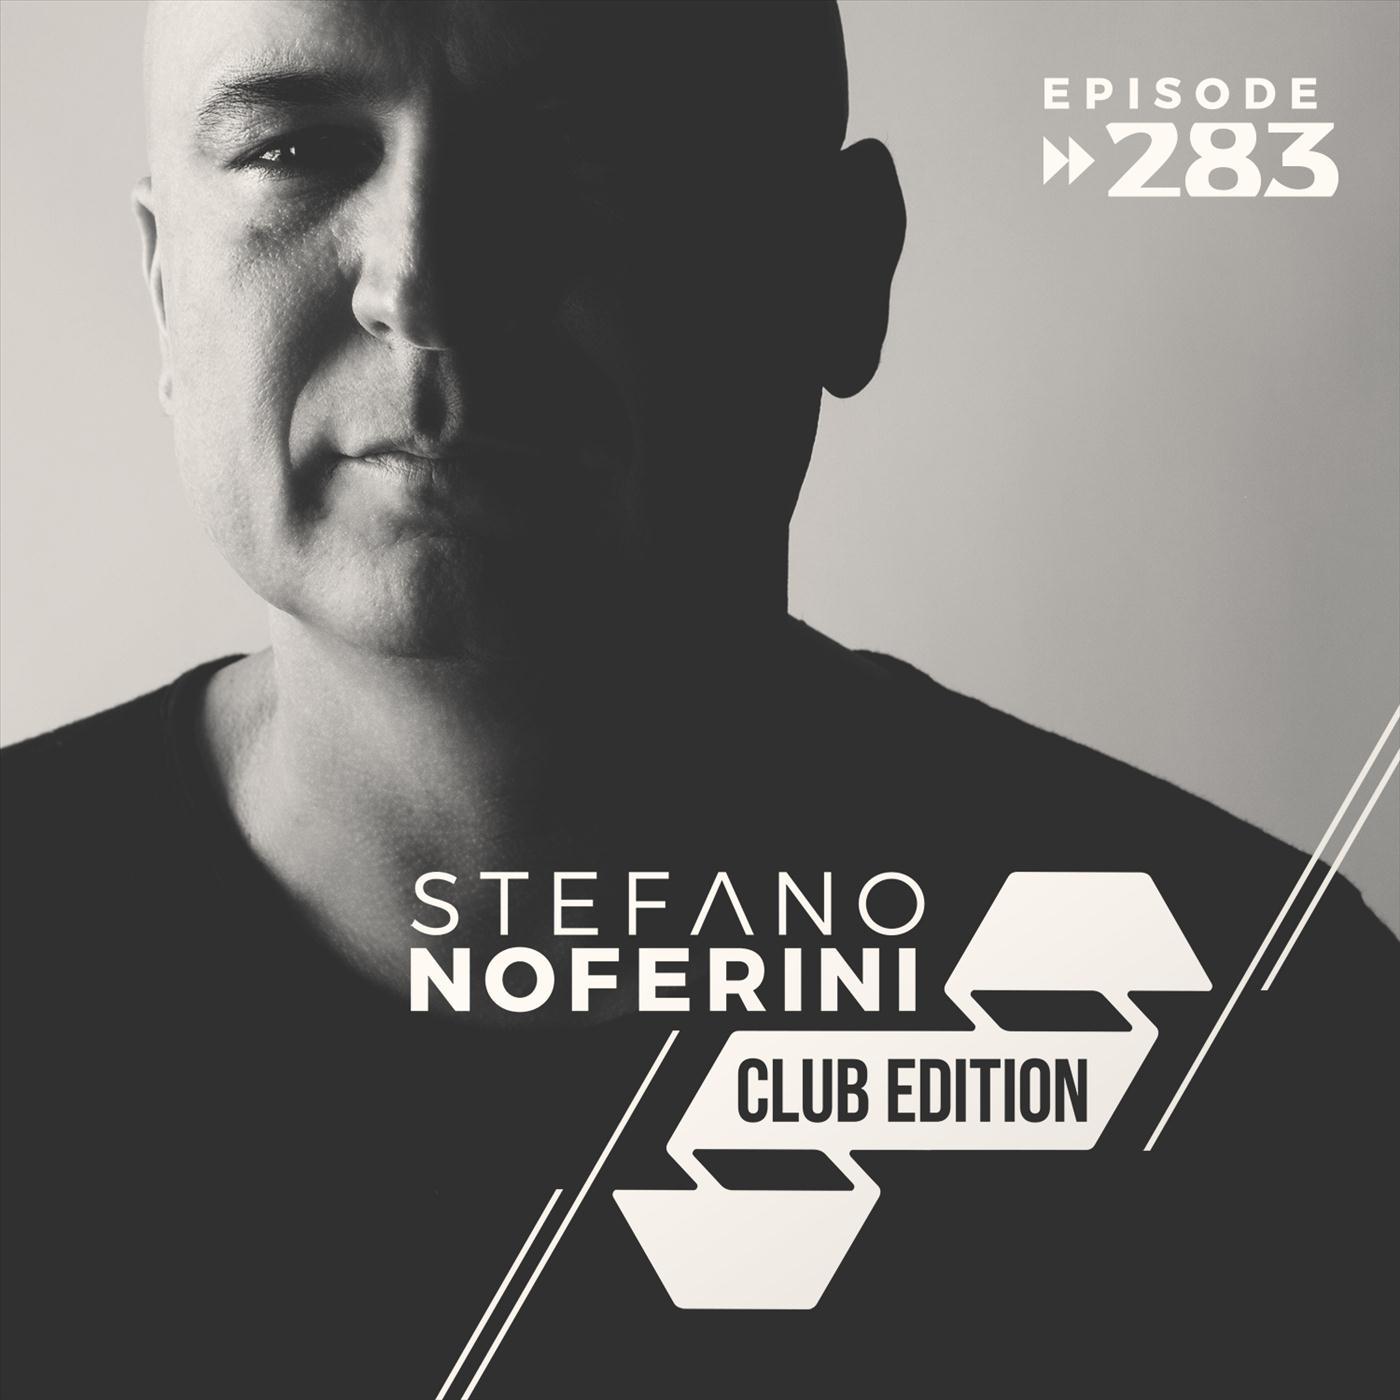 Club Edition, Ep. 283 - Live from Deeperfect at the Steelyard in London, UK